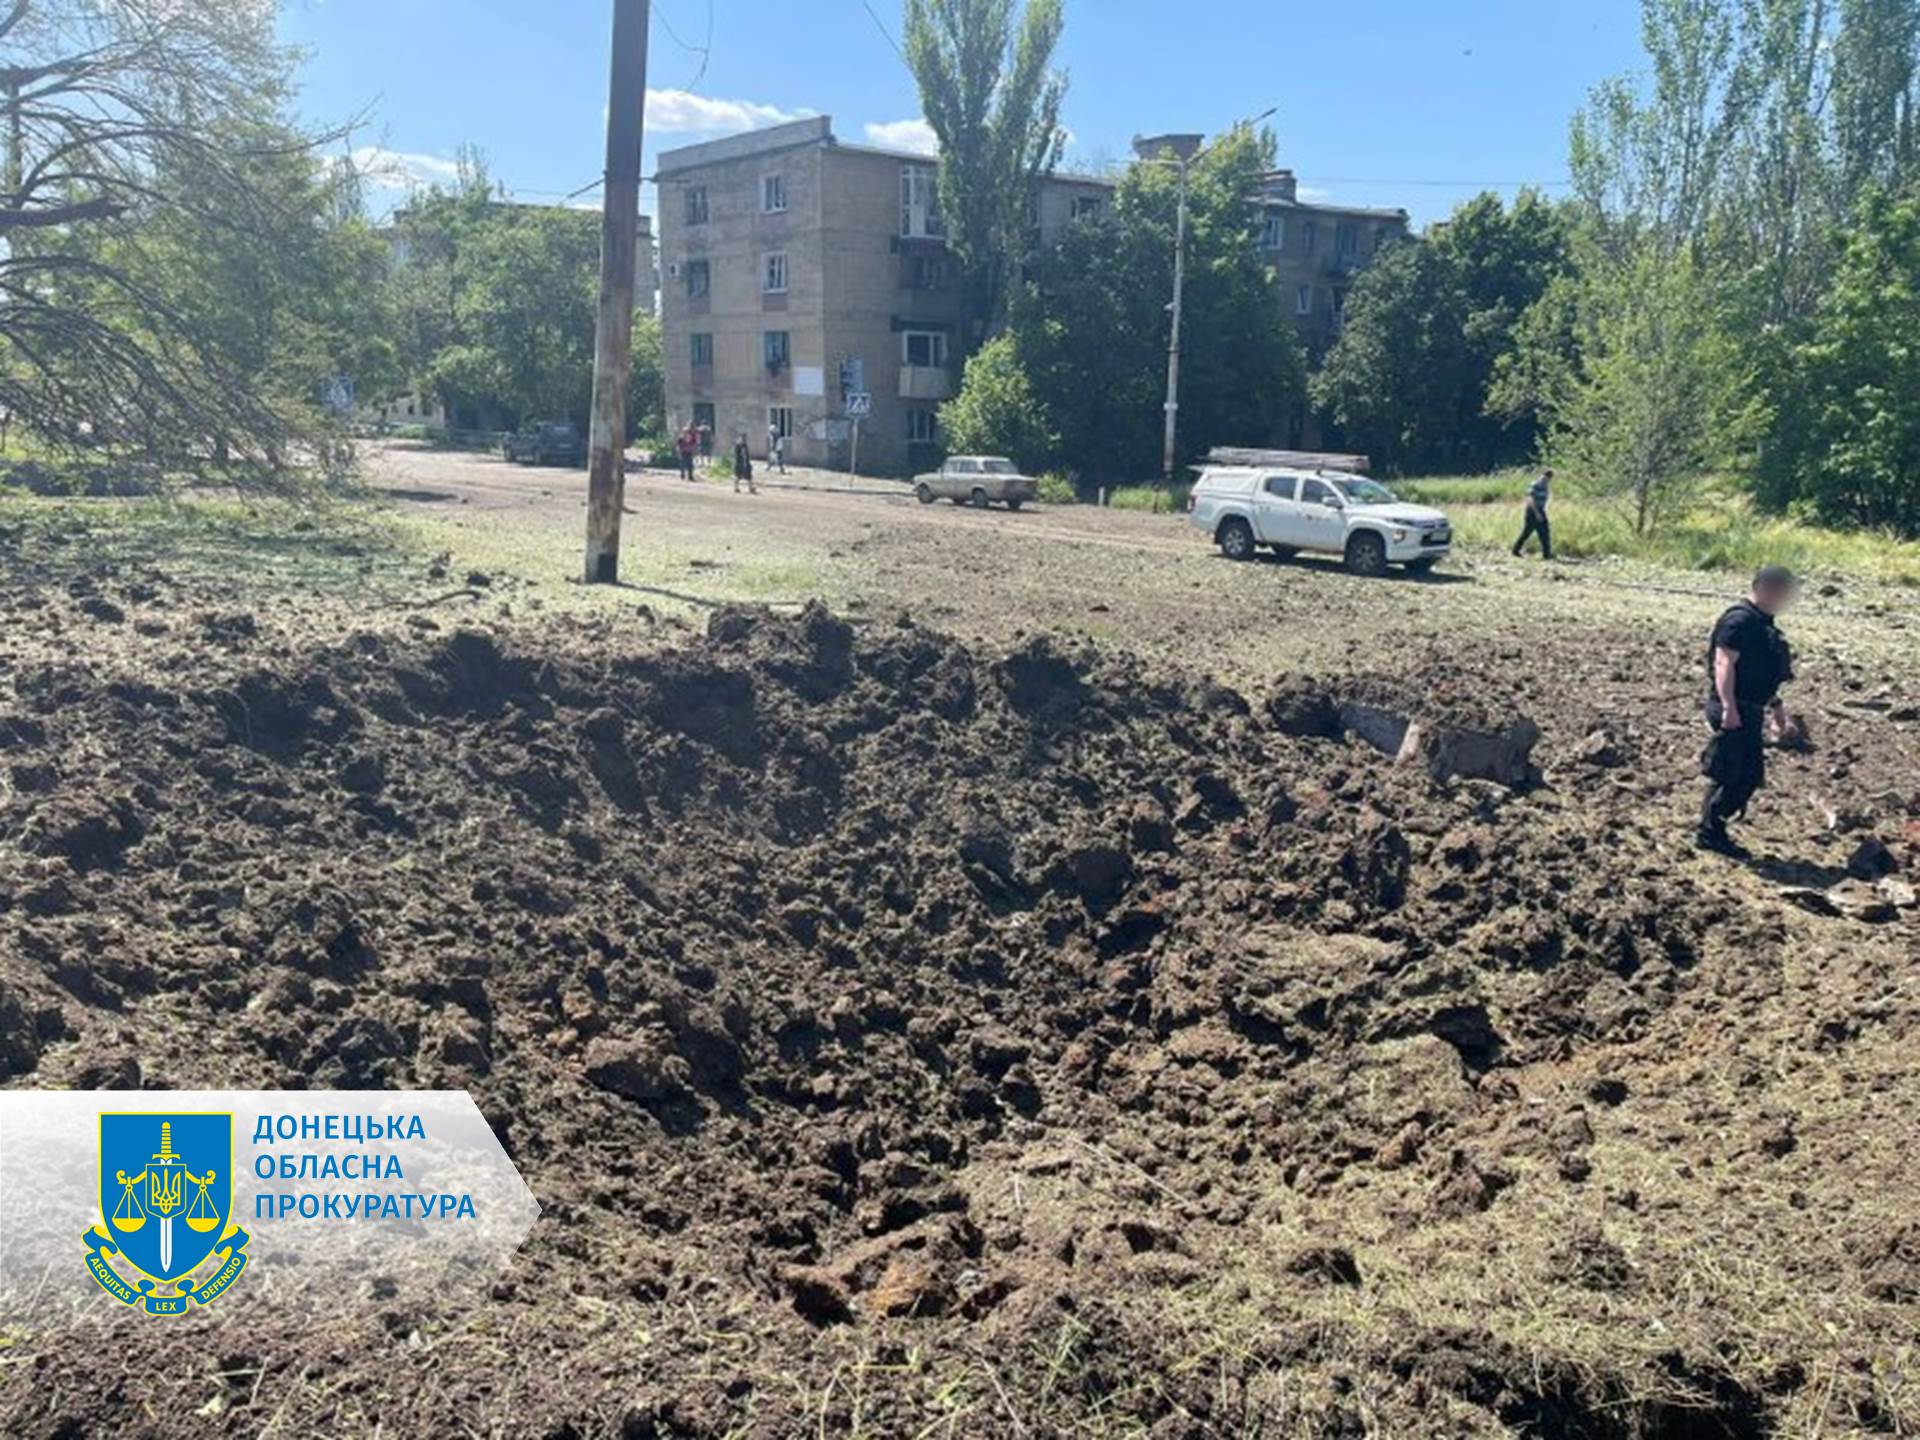 Russian forces launch guided bombs at Toretsk city center, injuring 6 people